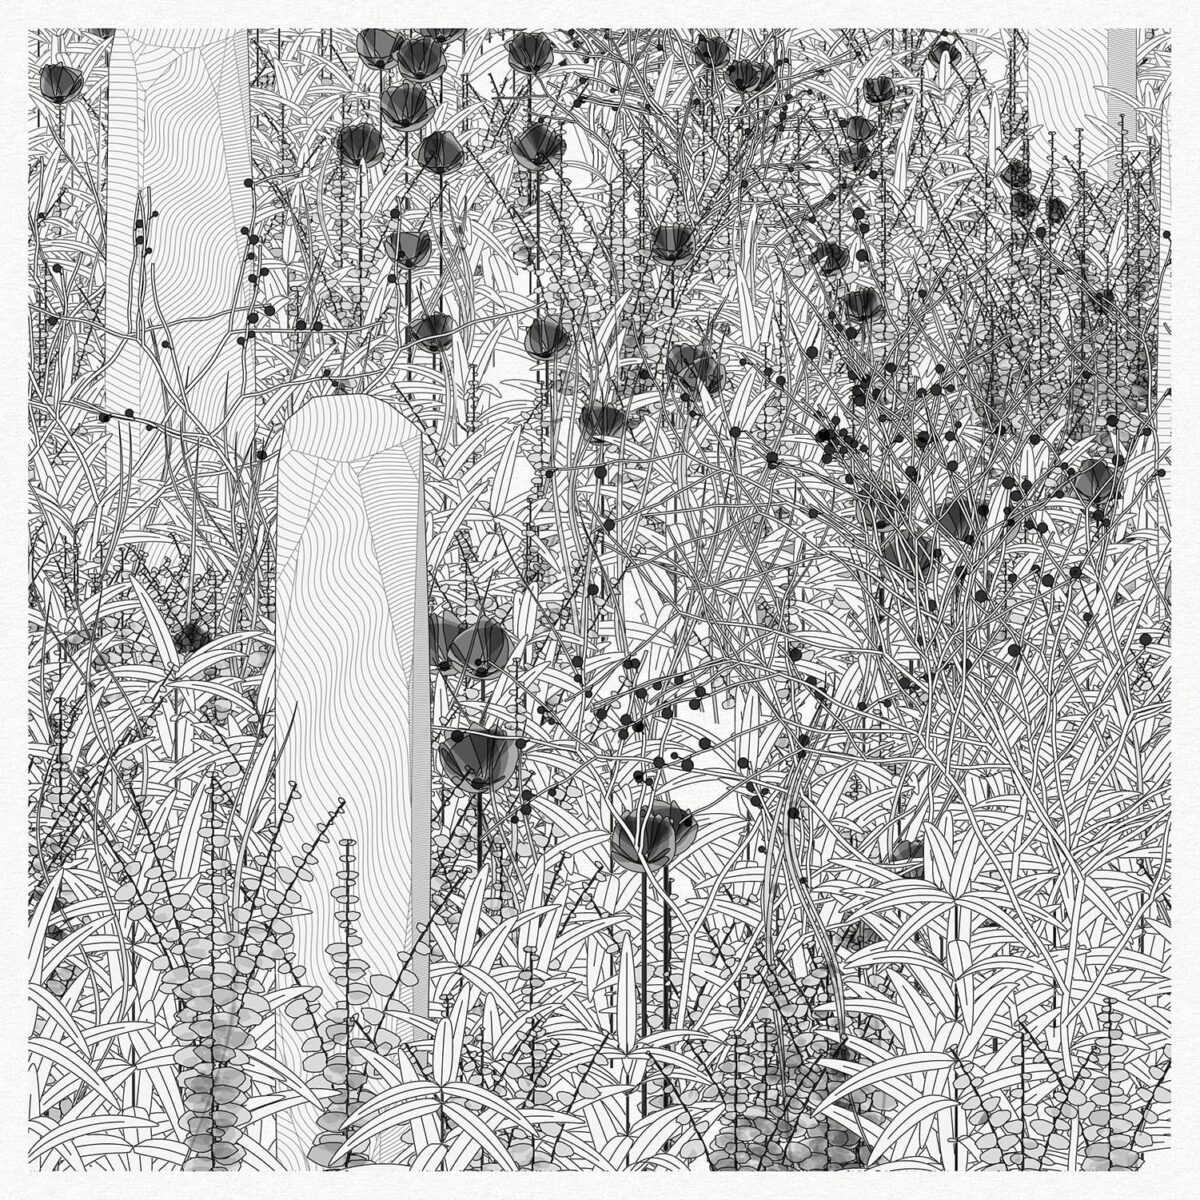 Gardens, Monolith - black and white florals with monoliths